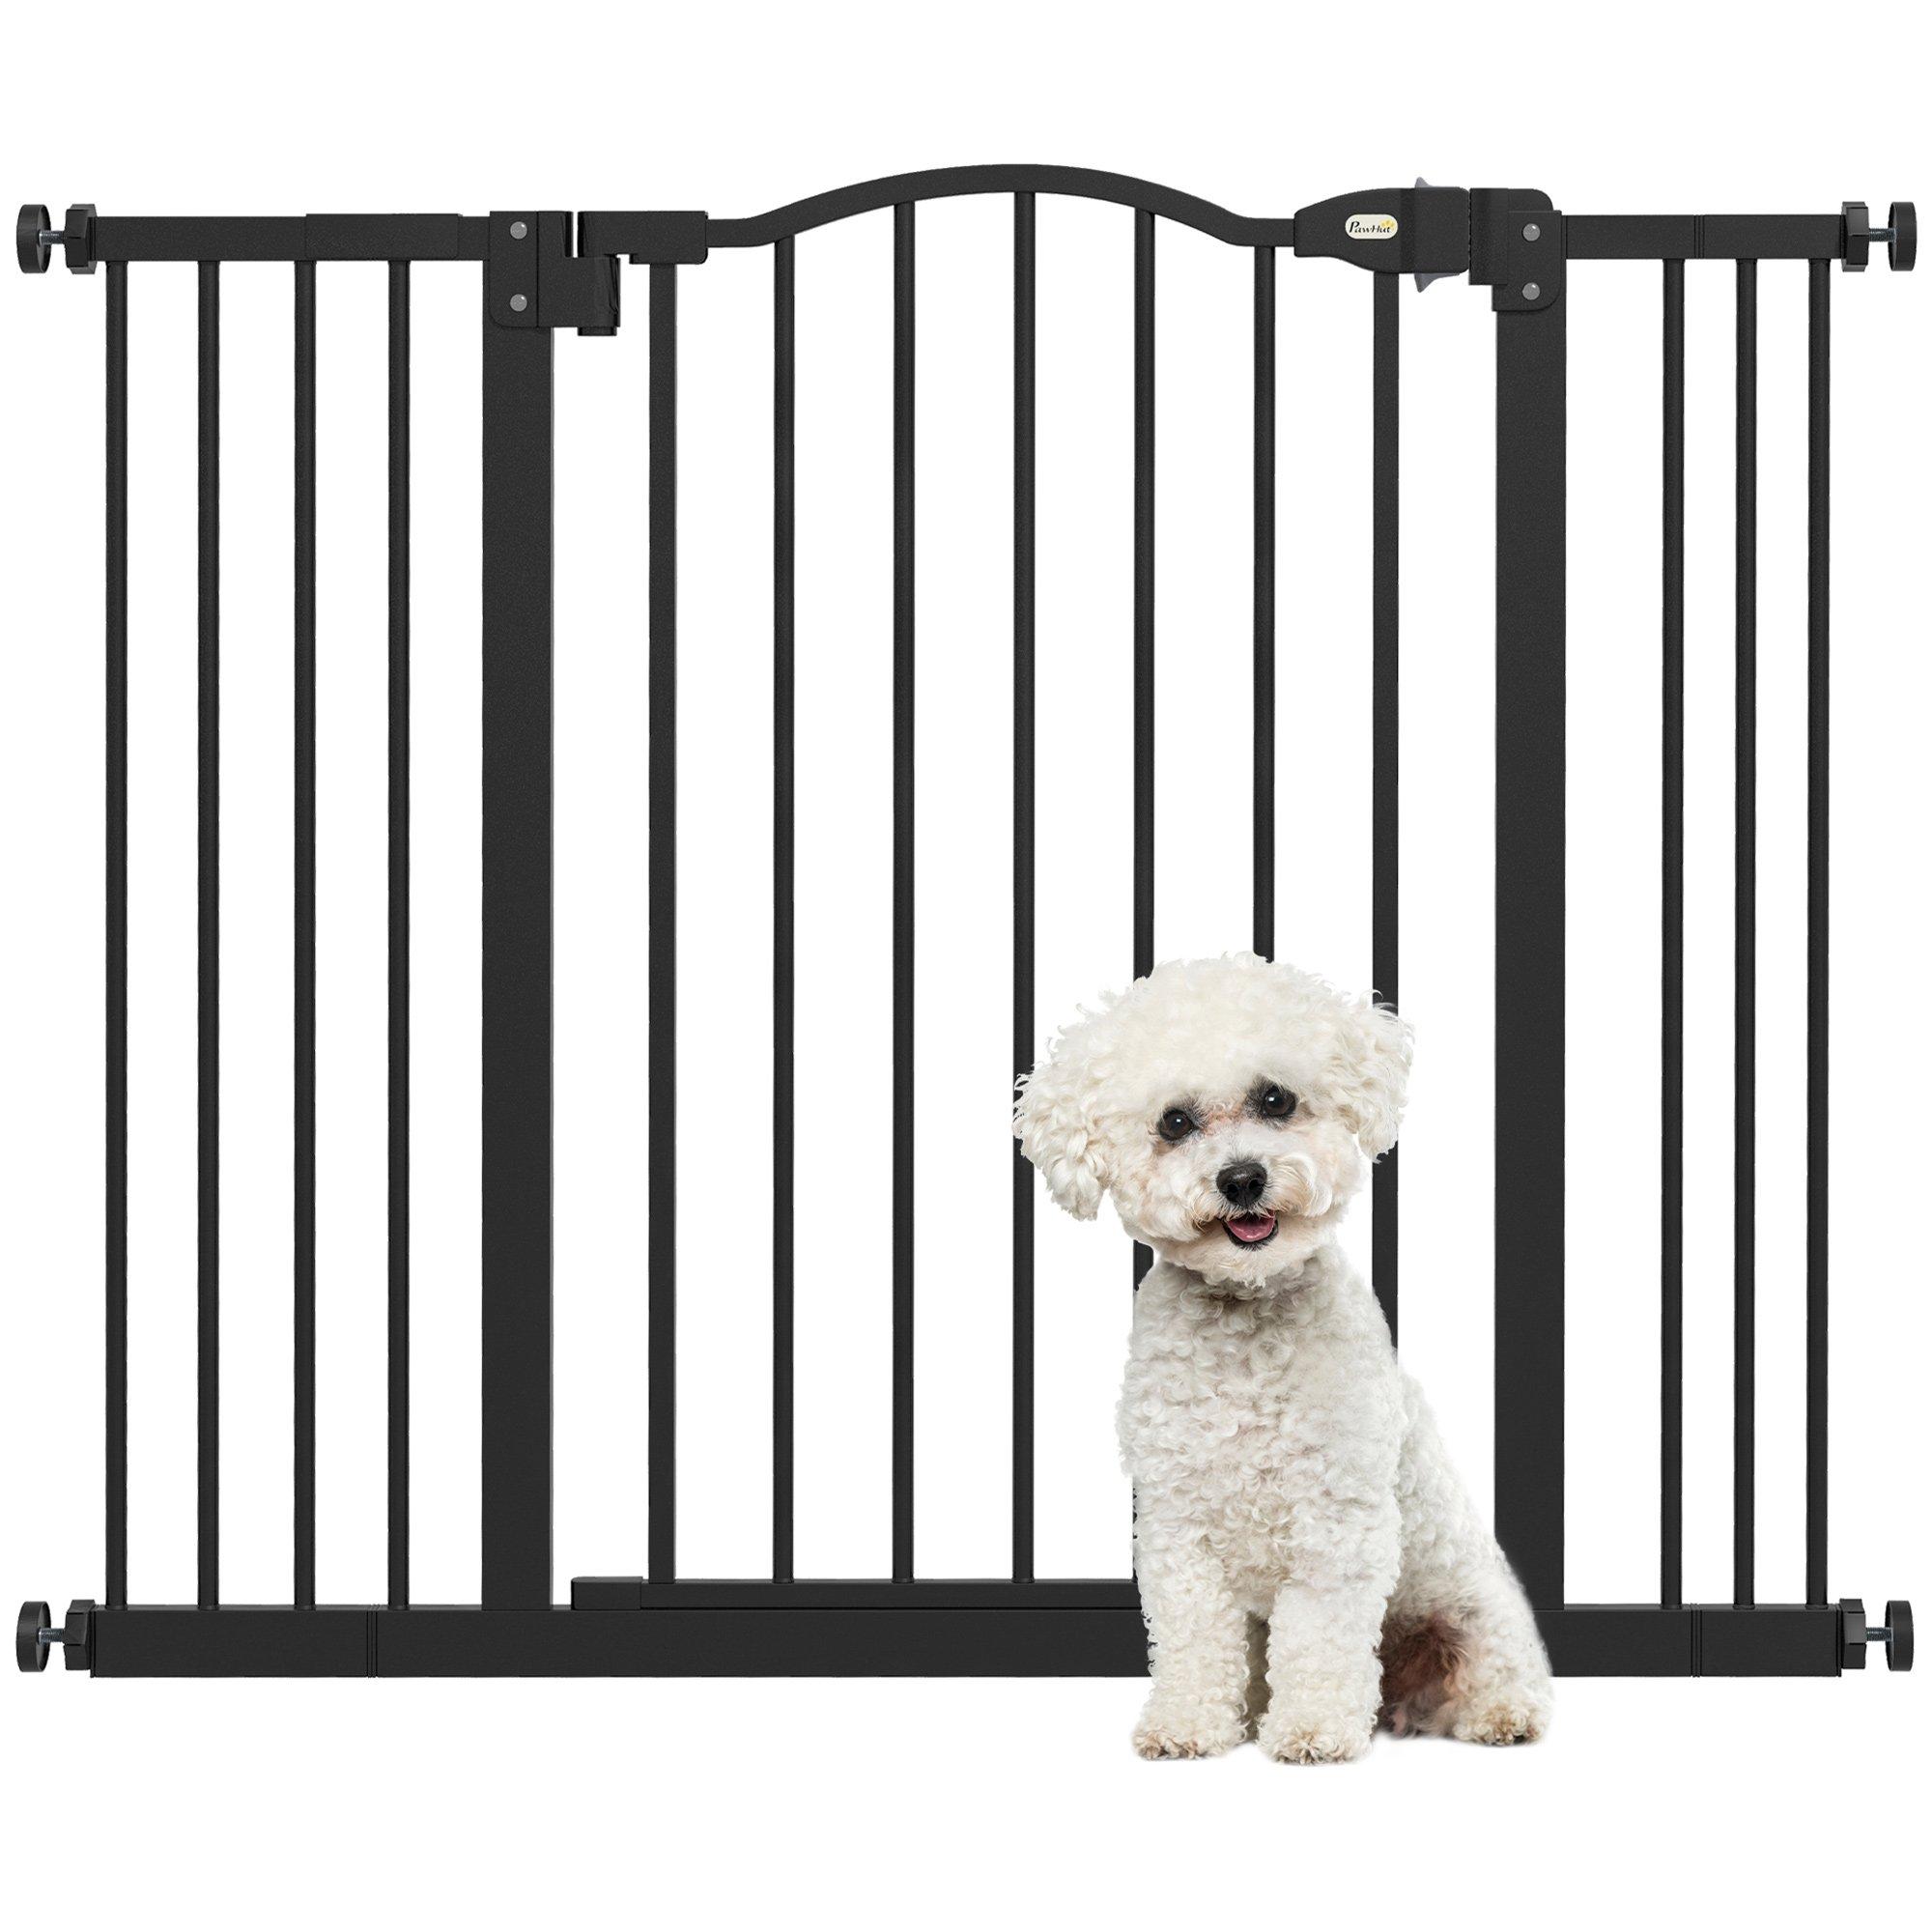 74-100cm Adjustable Metal Pet Gate Safety Barrier with Auto-Close Door